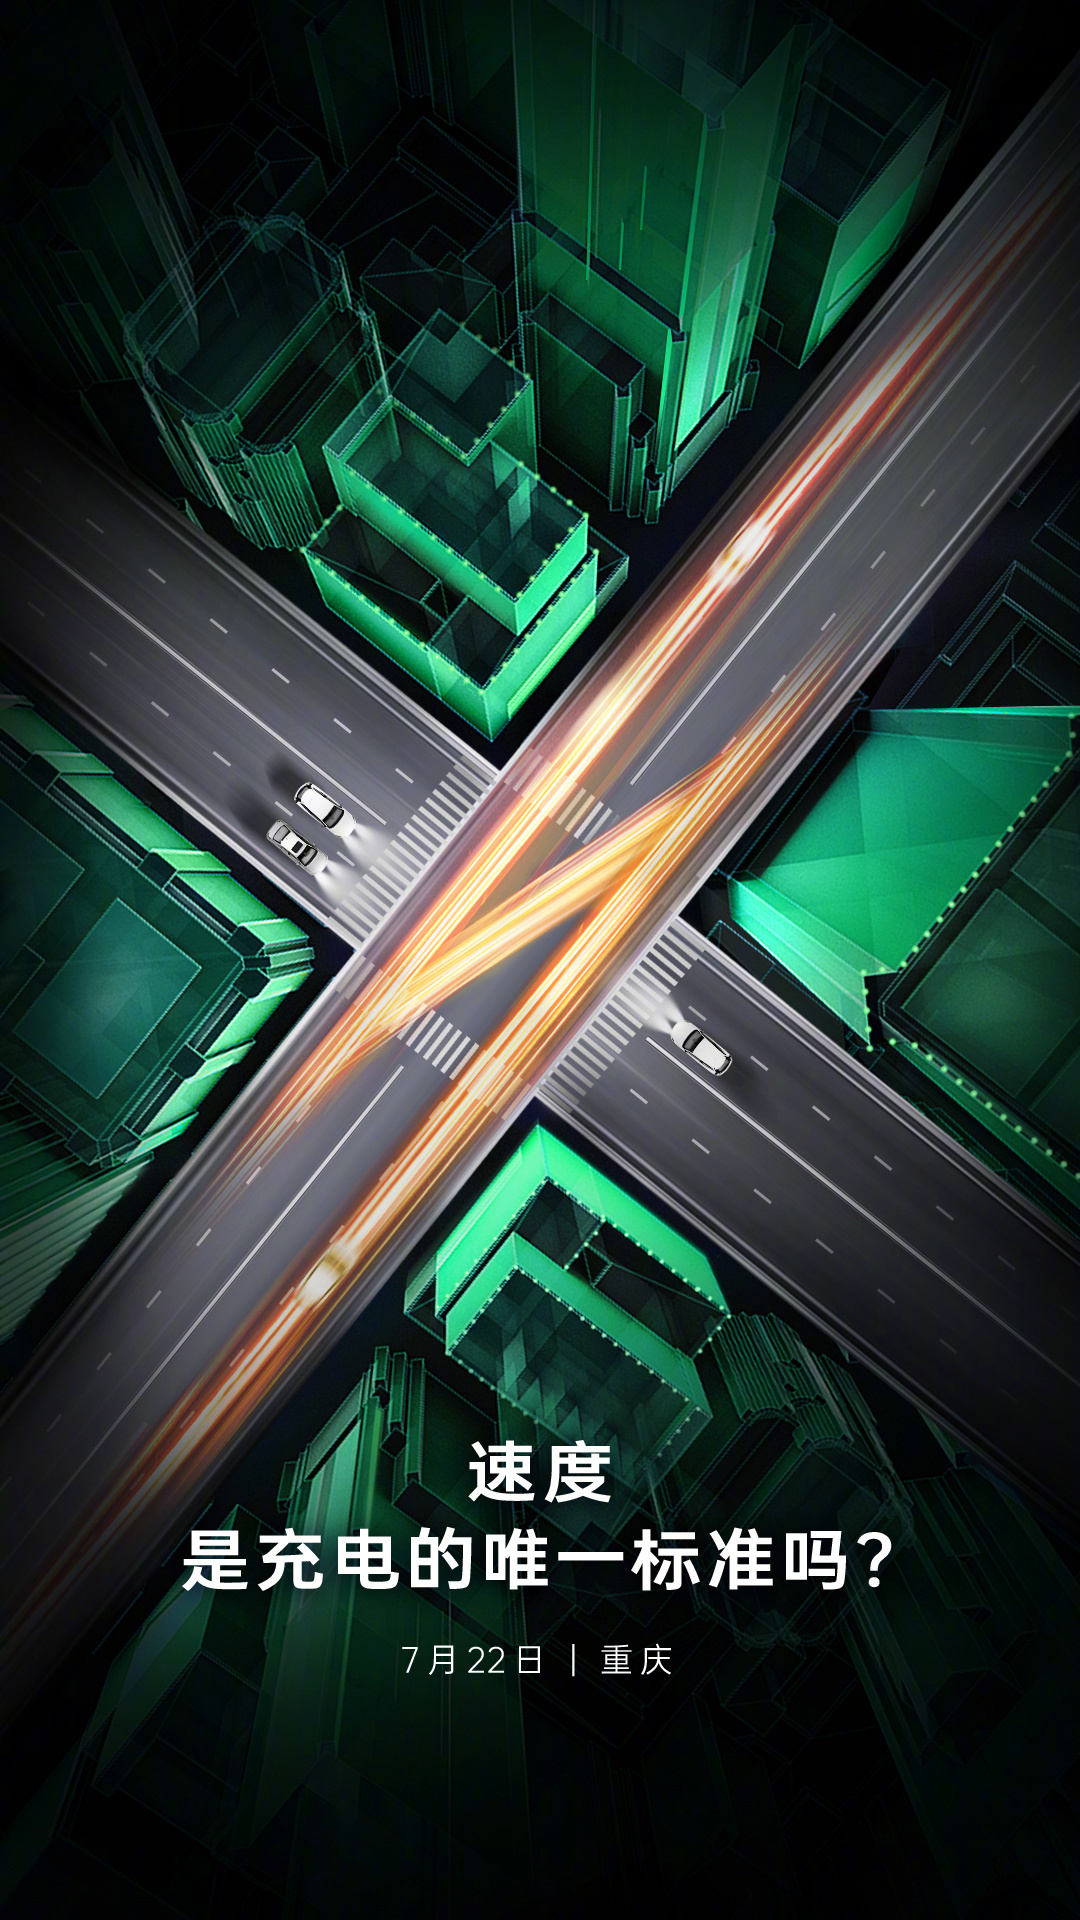 OPPO New Mobile Charging Technology Launch 22nd July